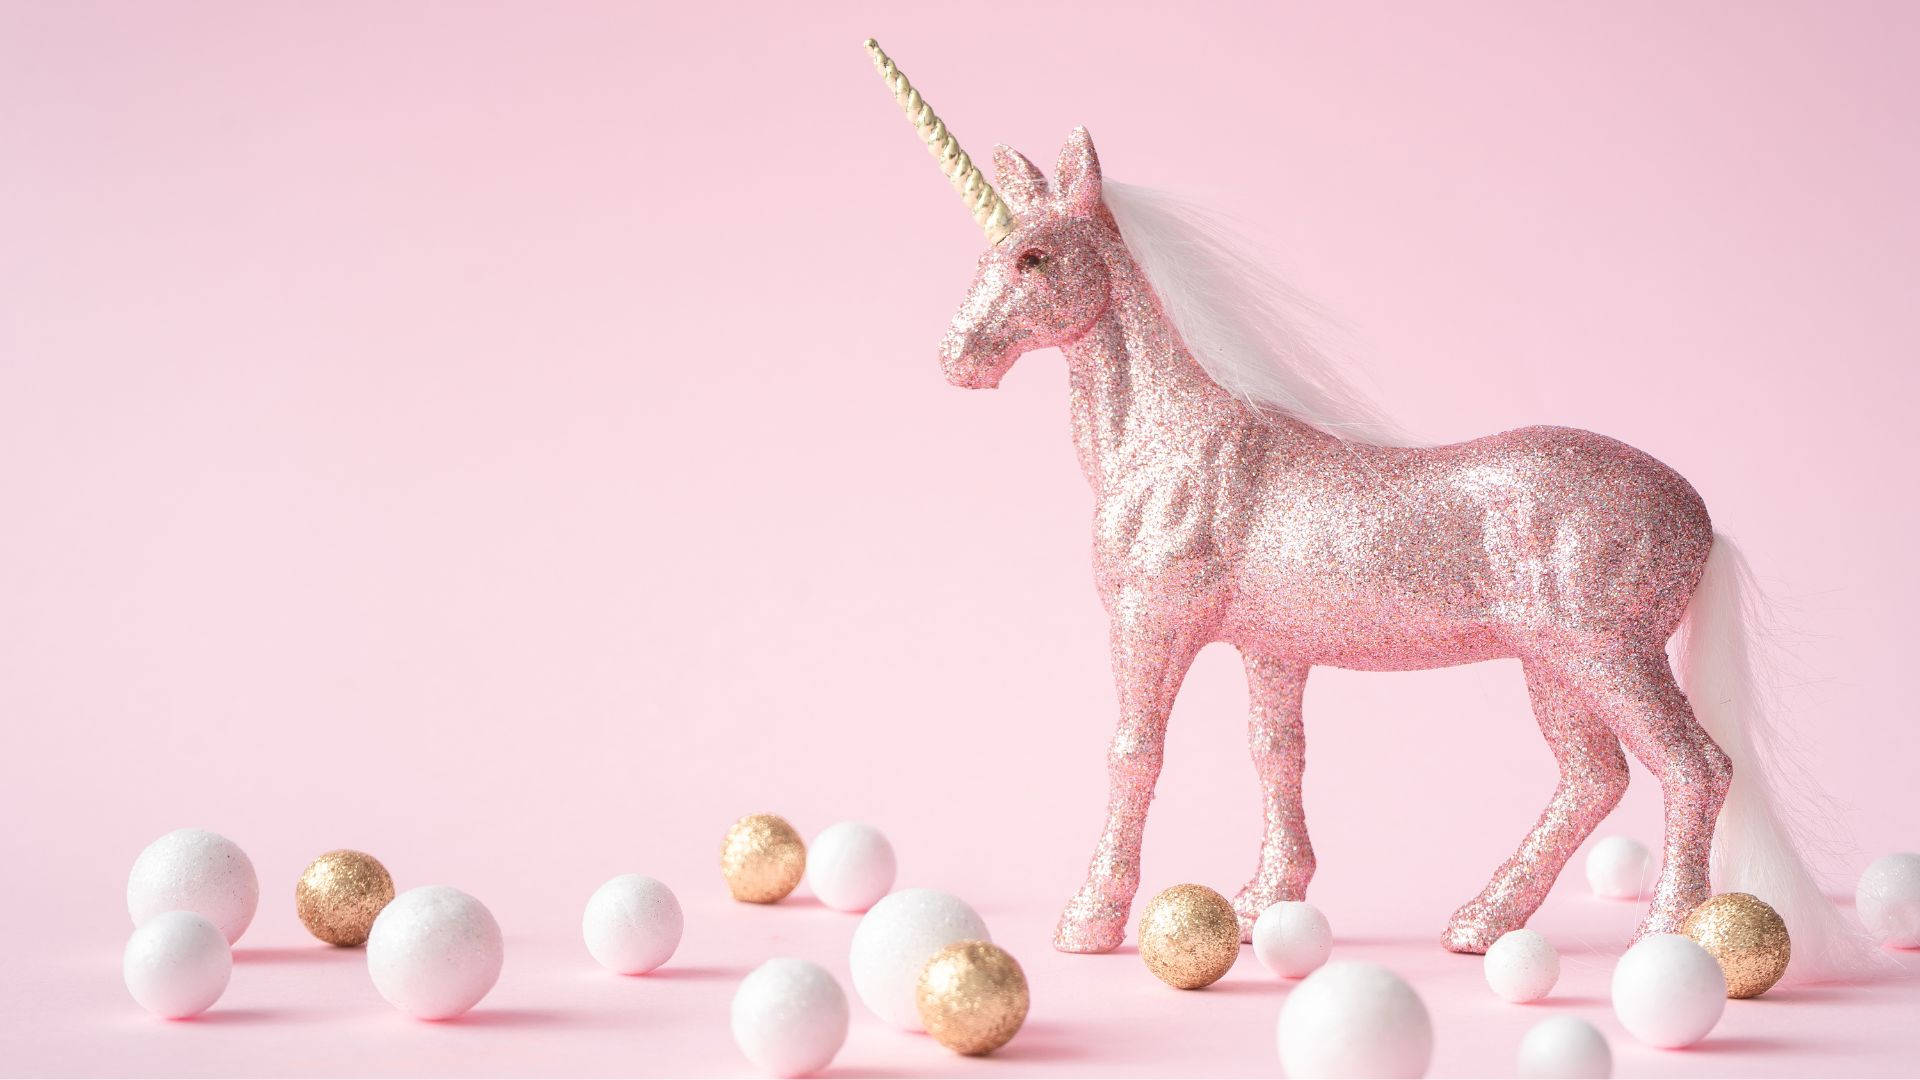 Embrace adventure with an enchanted, cool unicorn Wallpaper